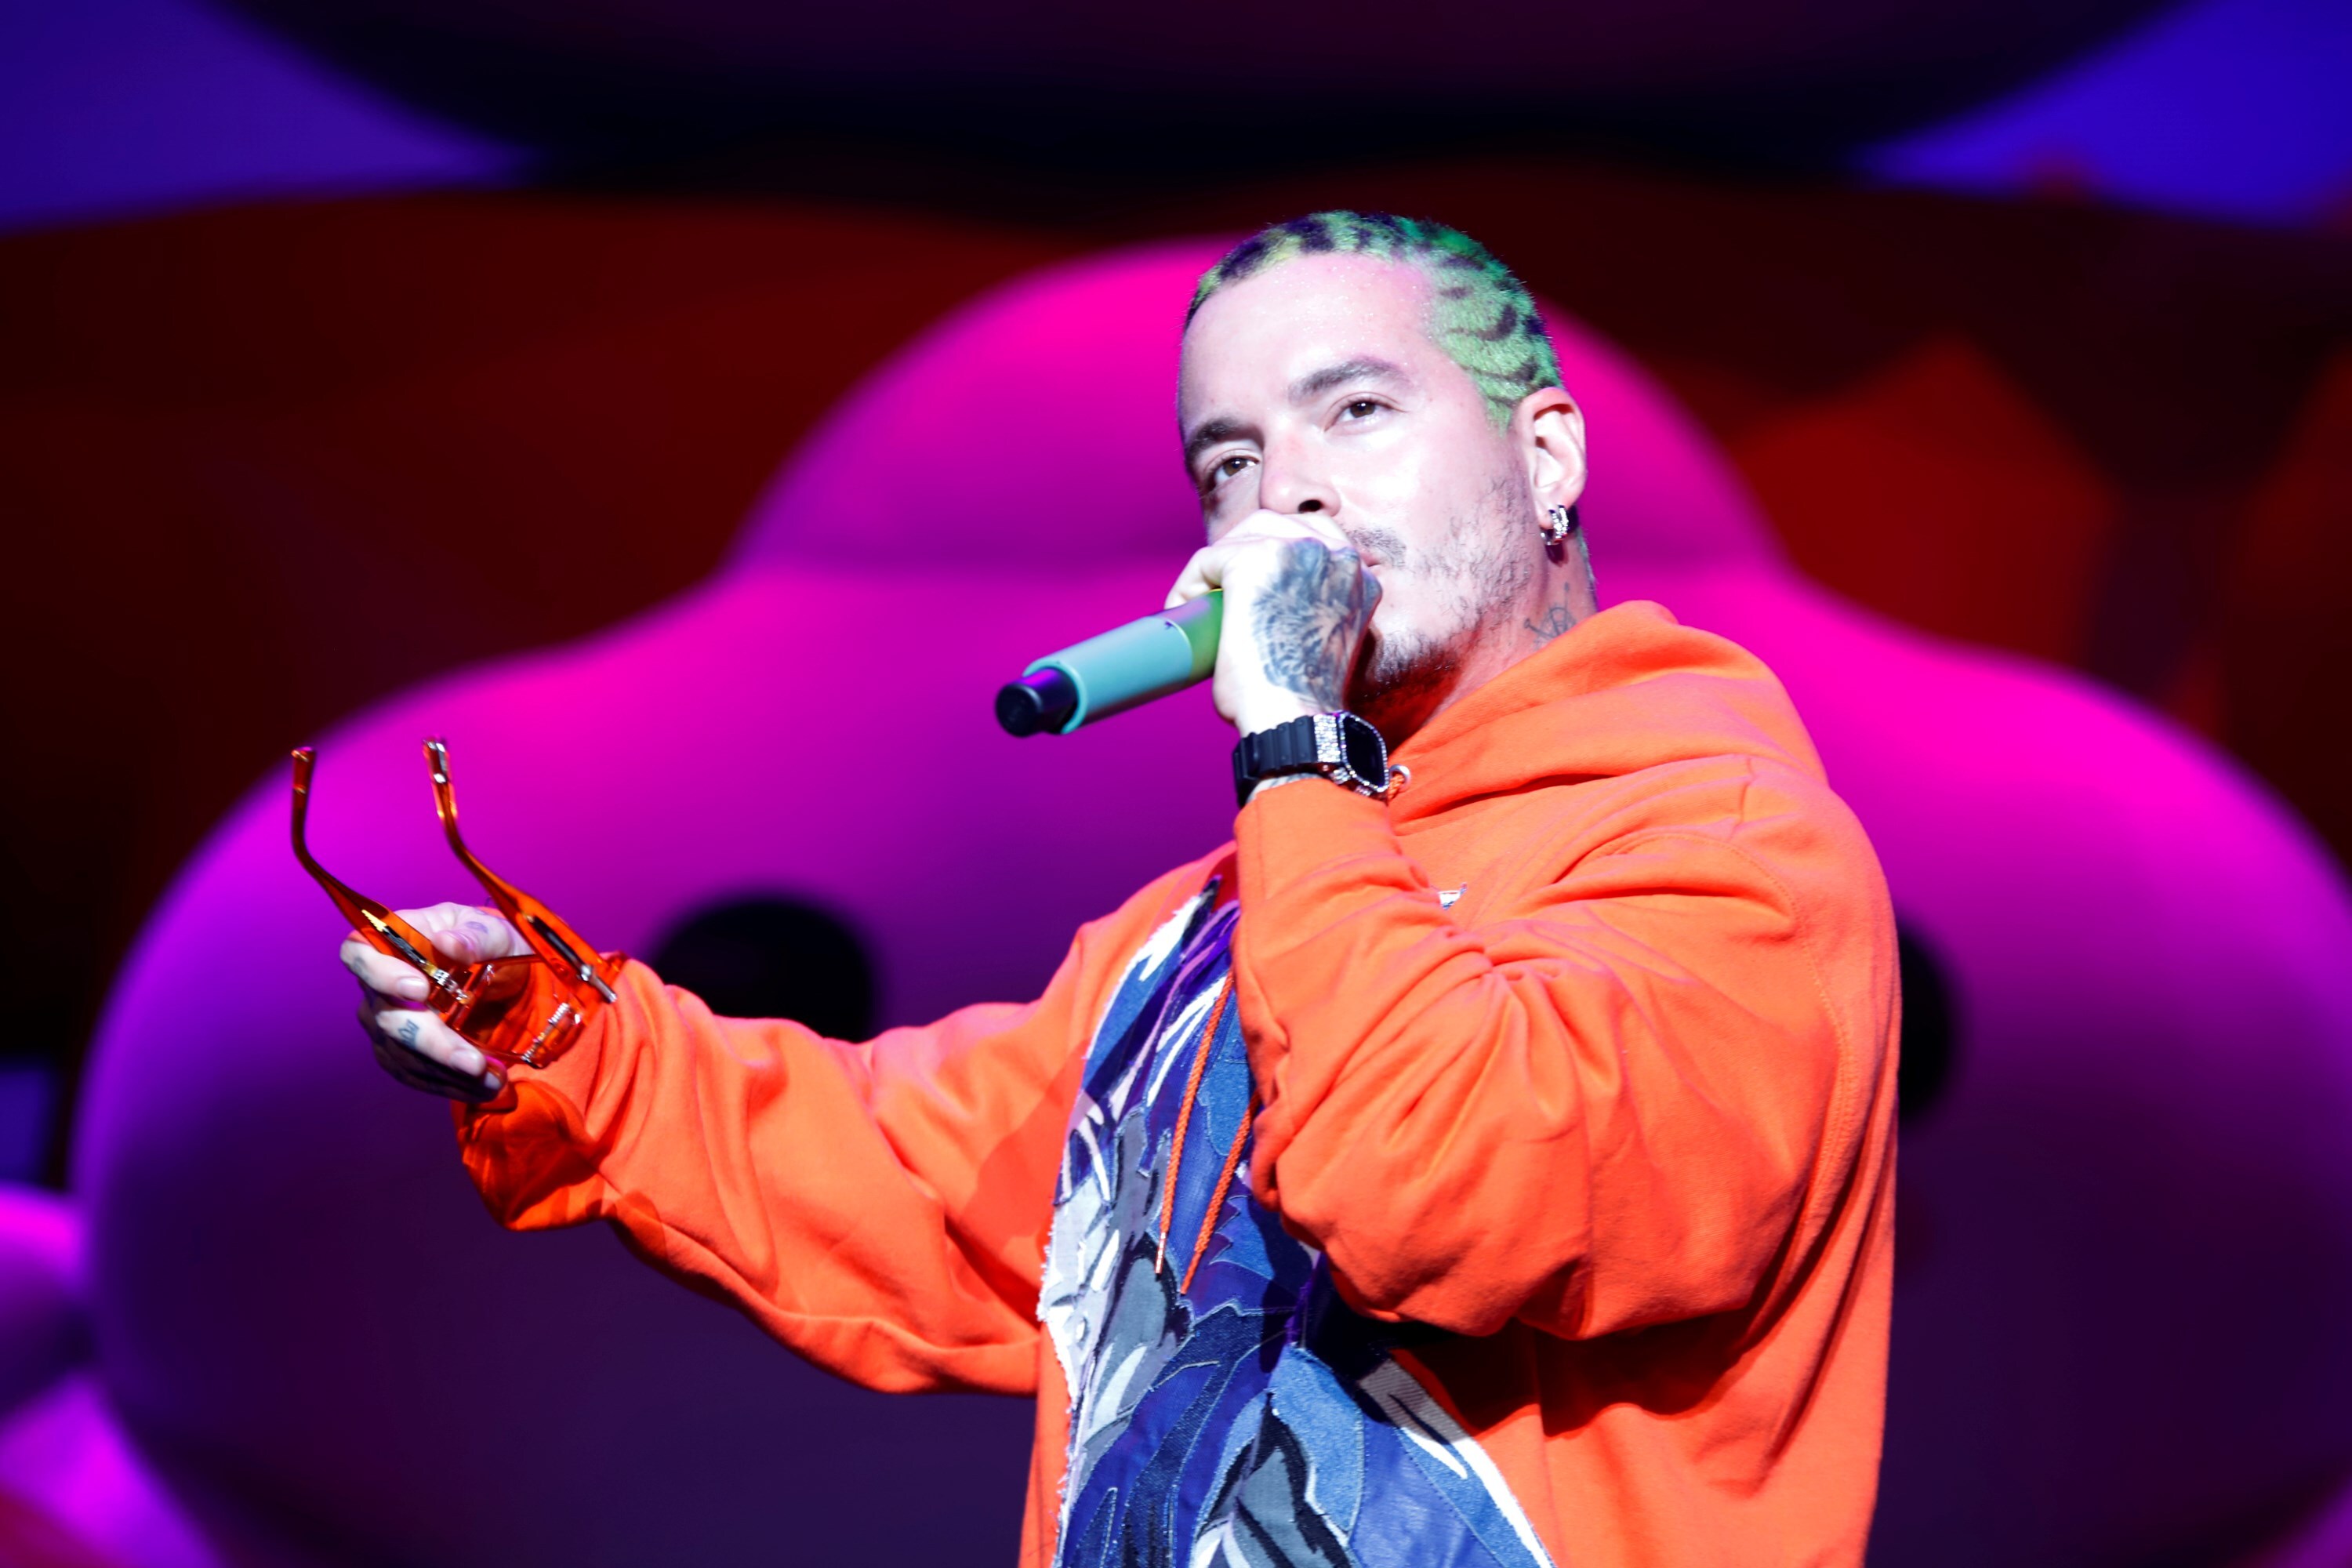 J Balvin announces 2022 tour on 'The Tonight Show', performs 'In